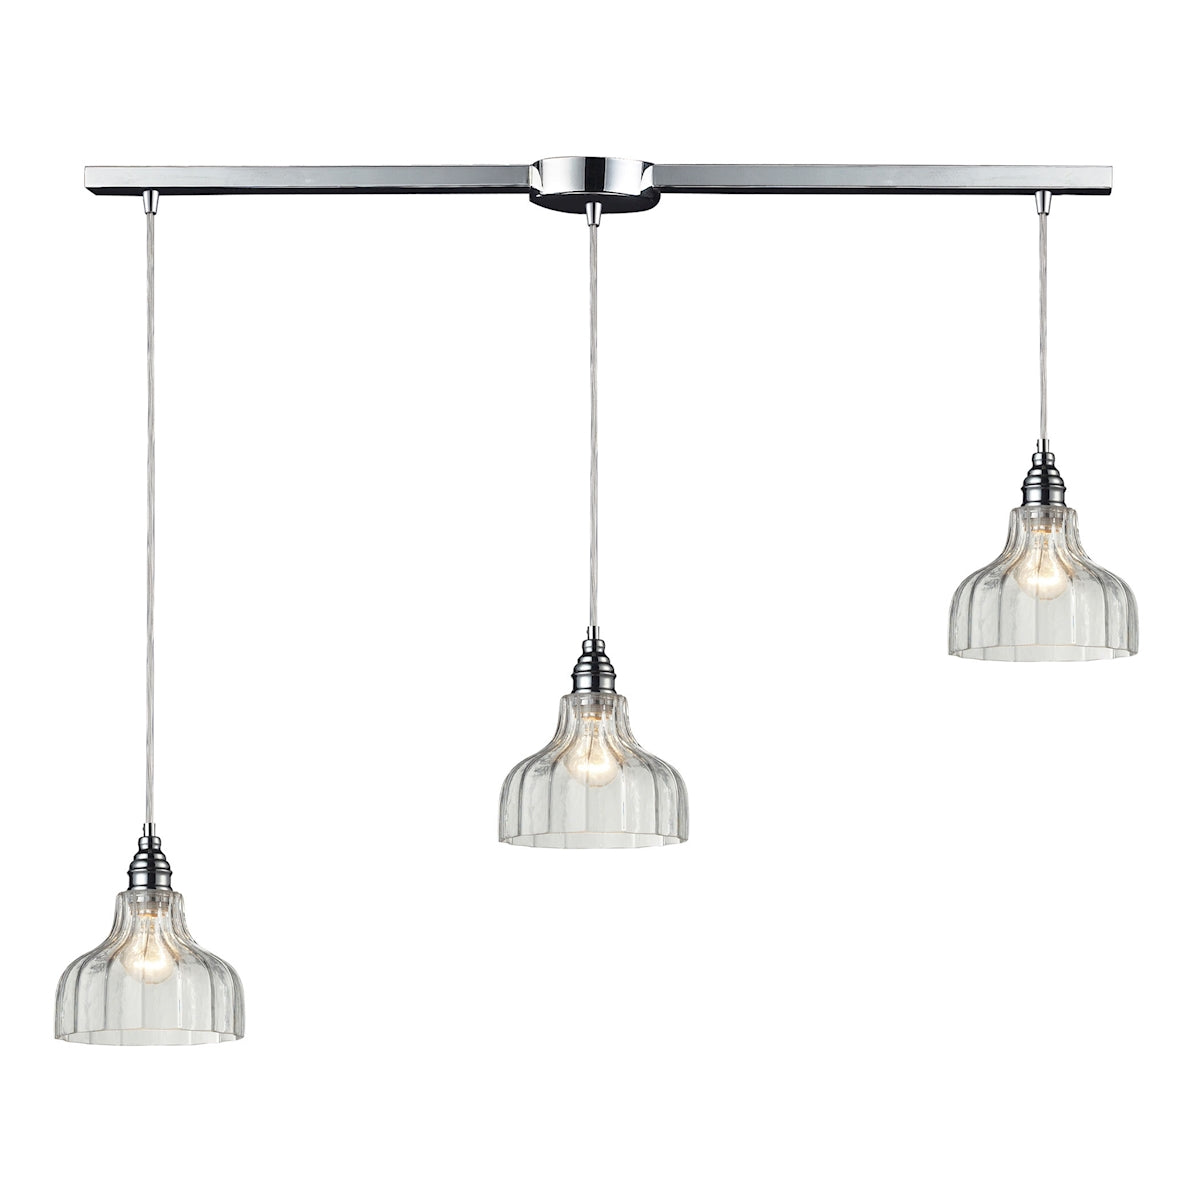 ELK Lighting 46018/3L Danica 3-Light Linear Pendant Fixture in Polished Chrome with Clear Glass